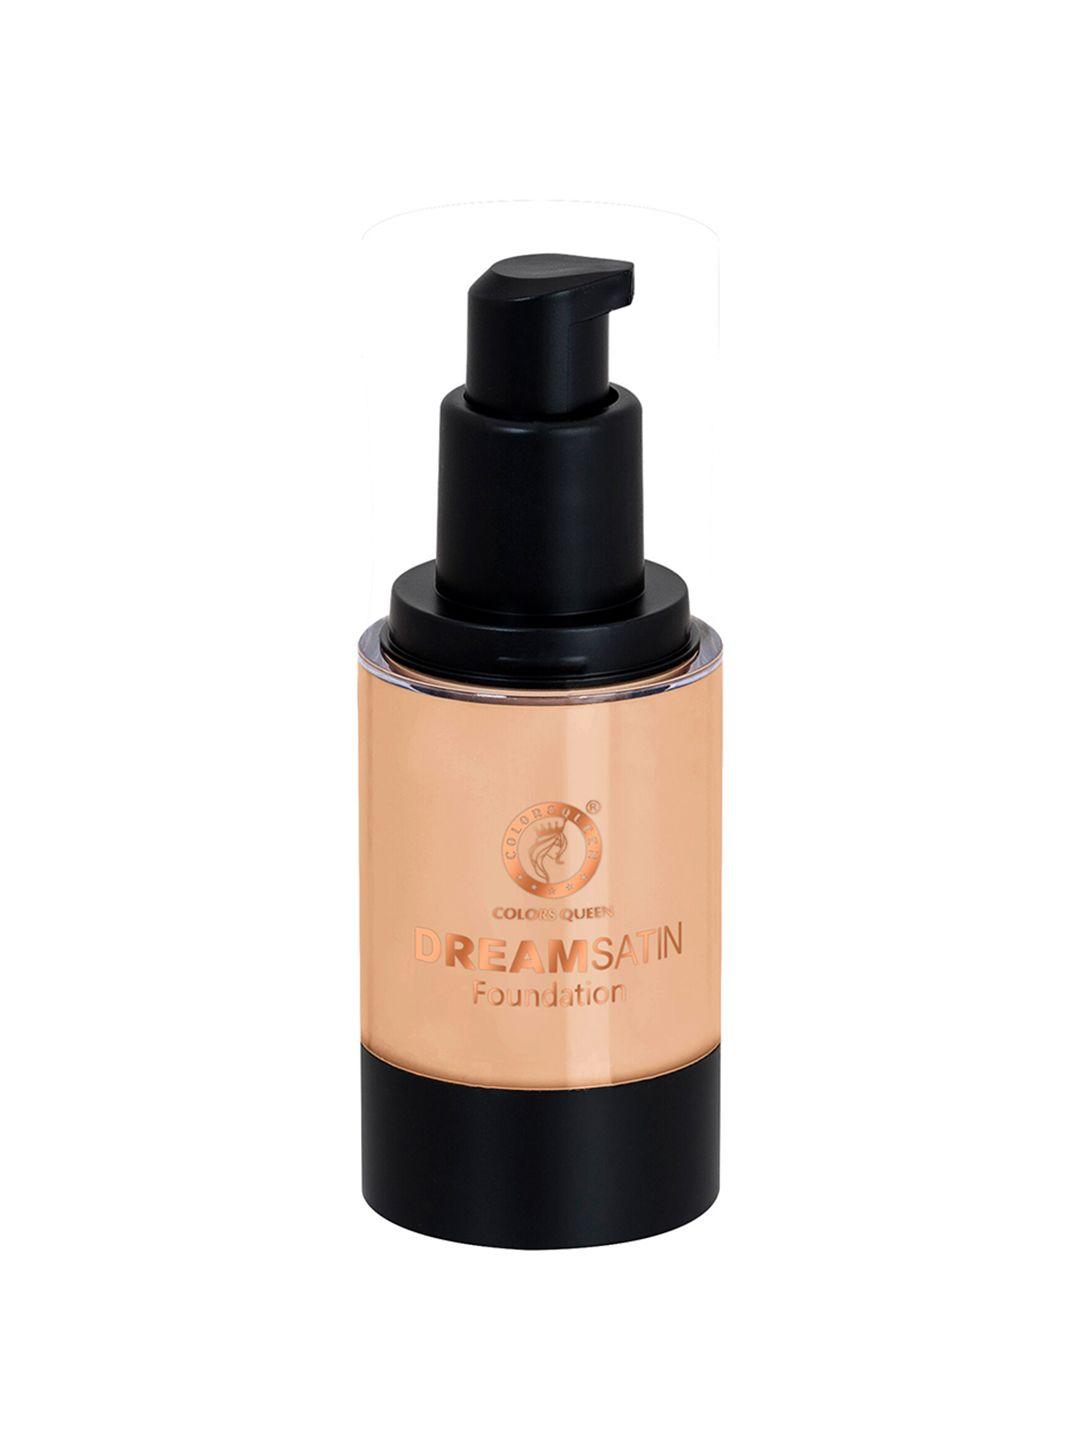 colors queen dream satin oil free water proof foundation